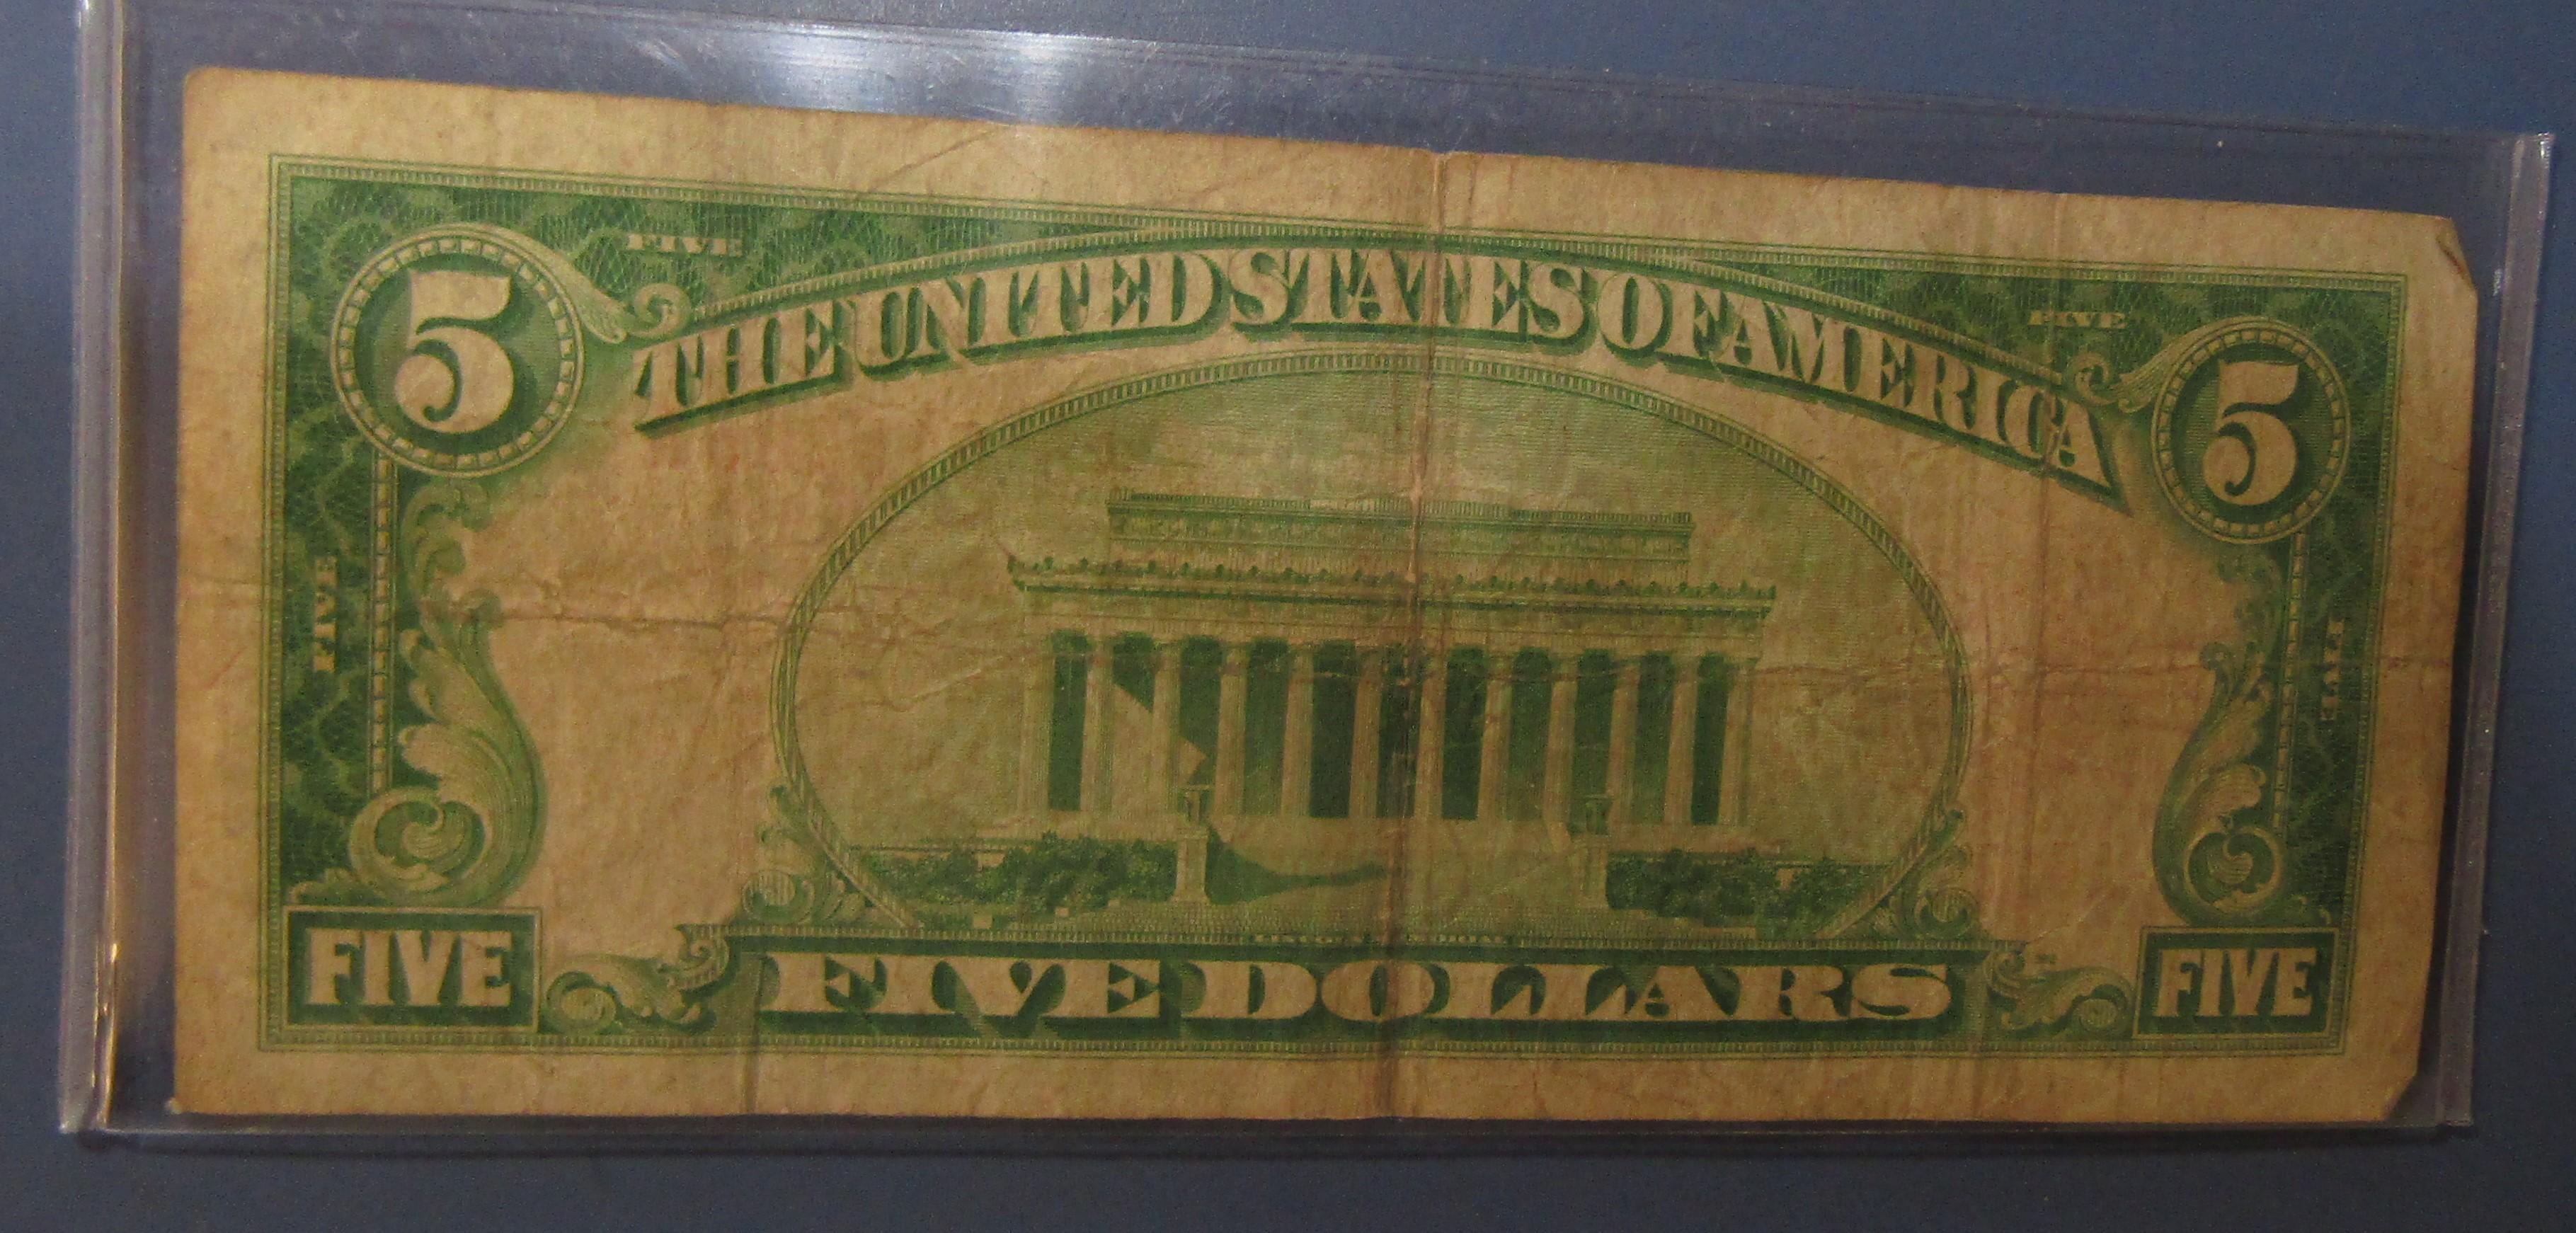 1928 $5.00 RED SEAL US NOTE FINE